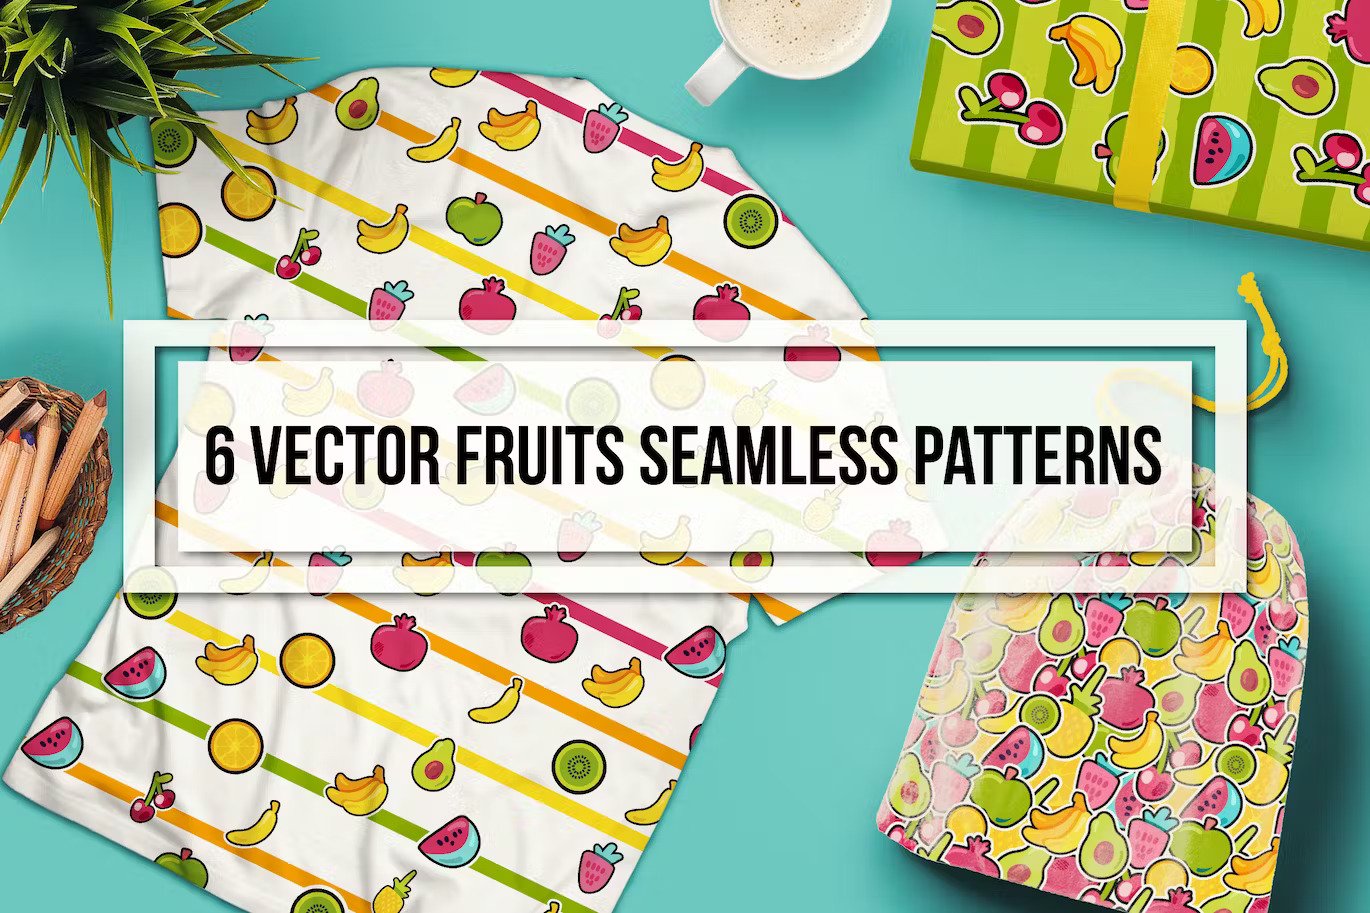 A happy fruits seamless patterns